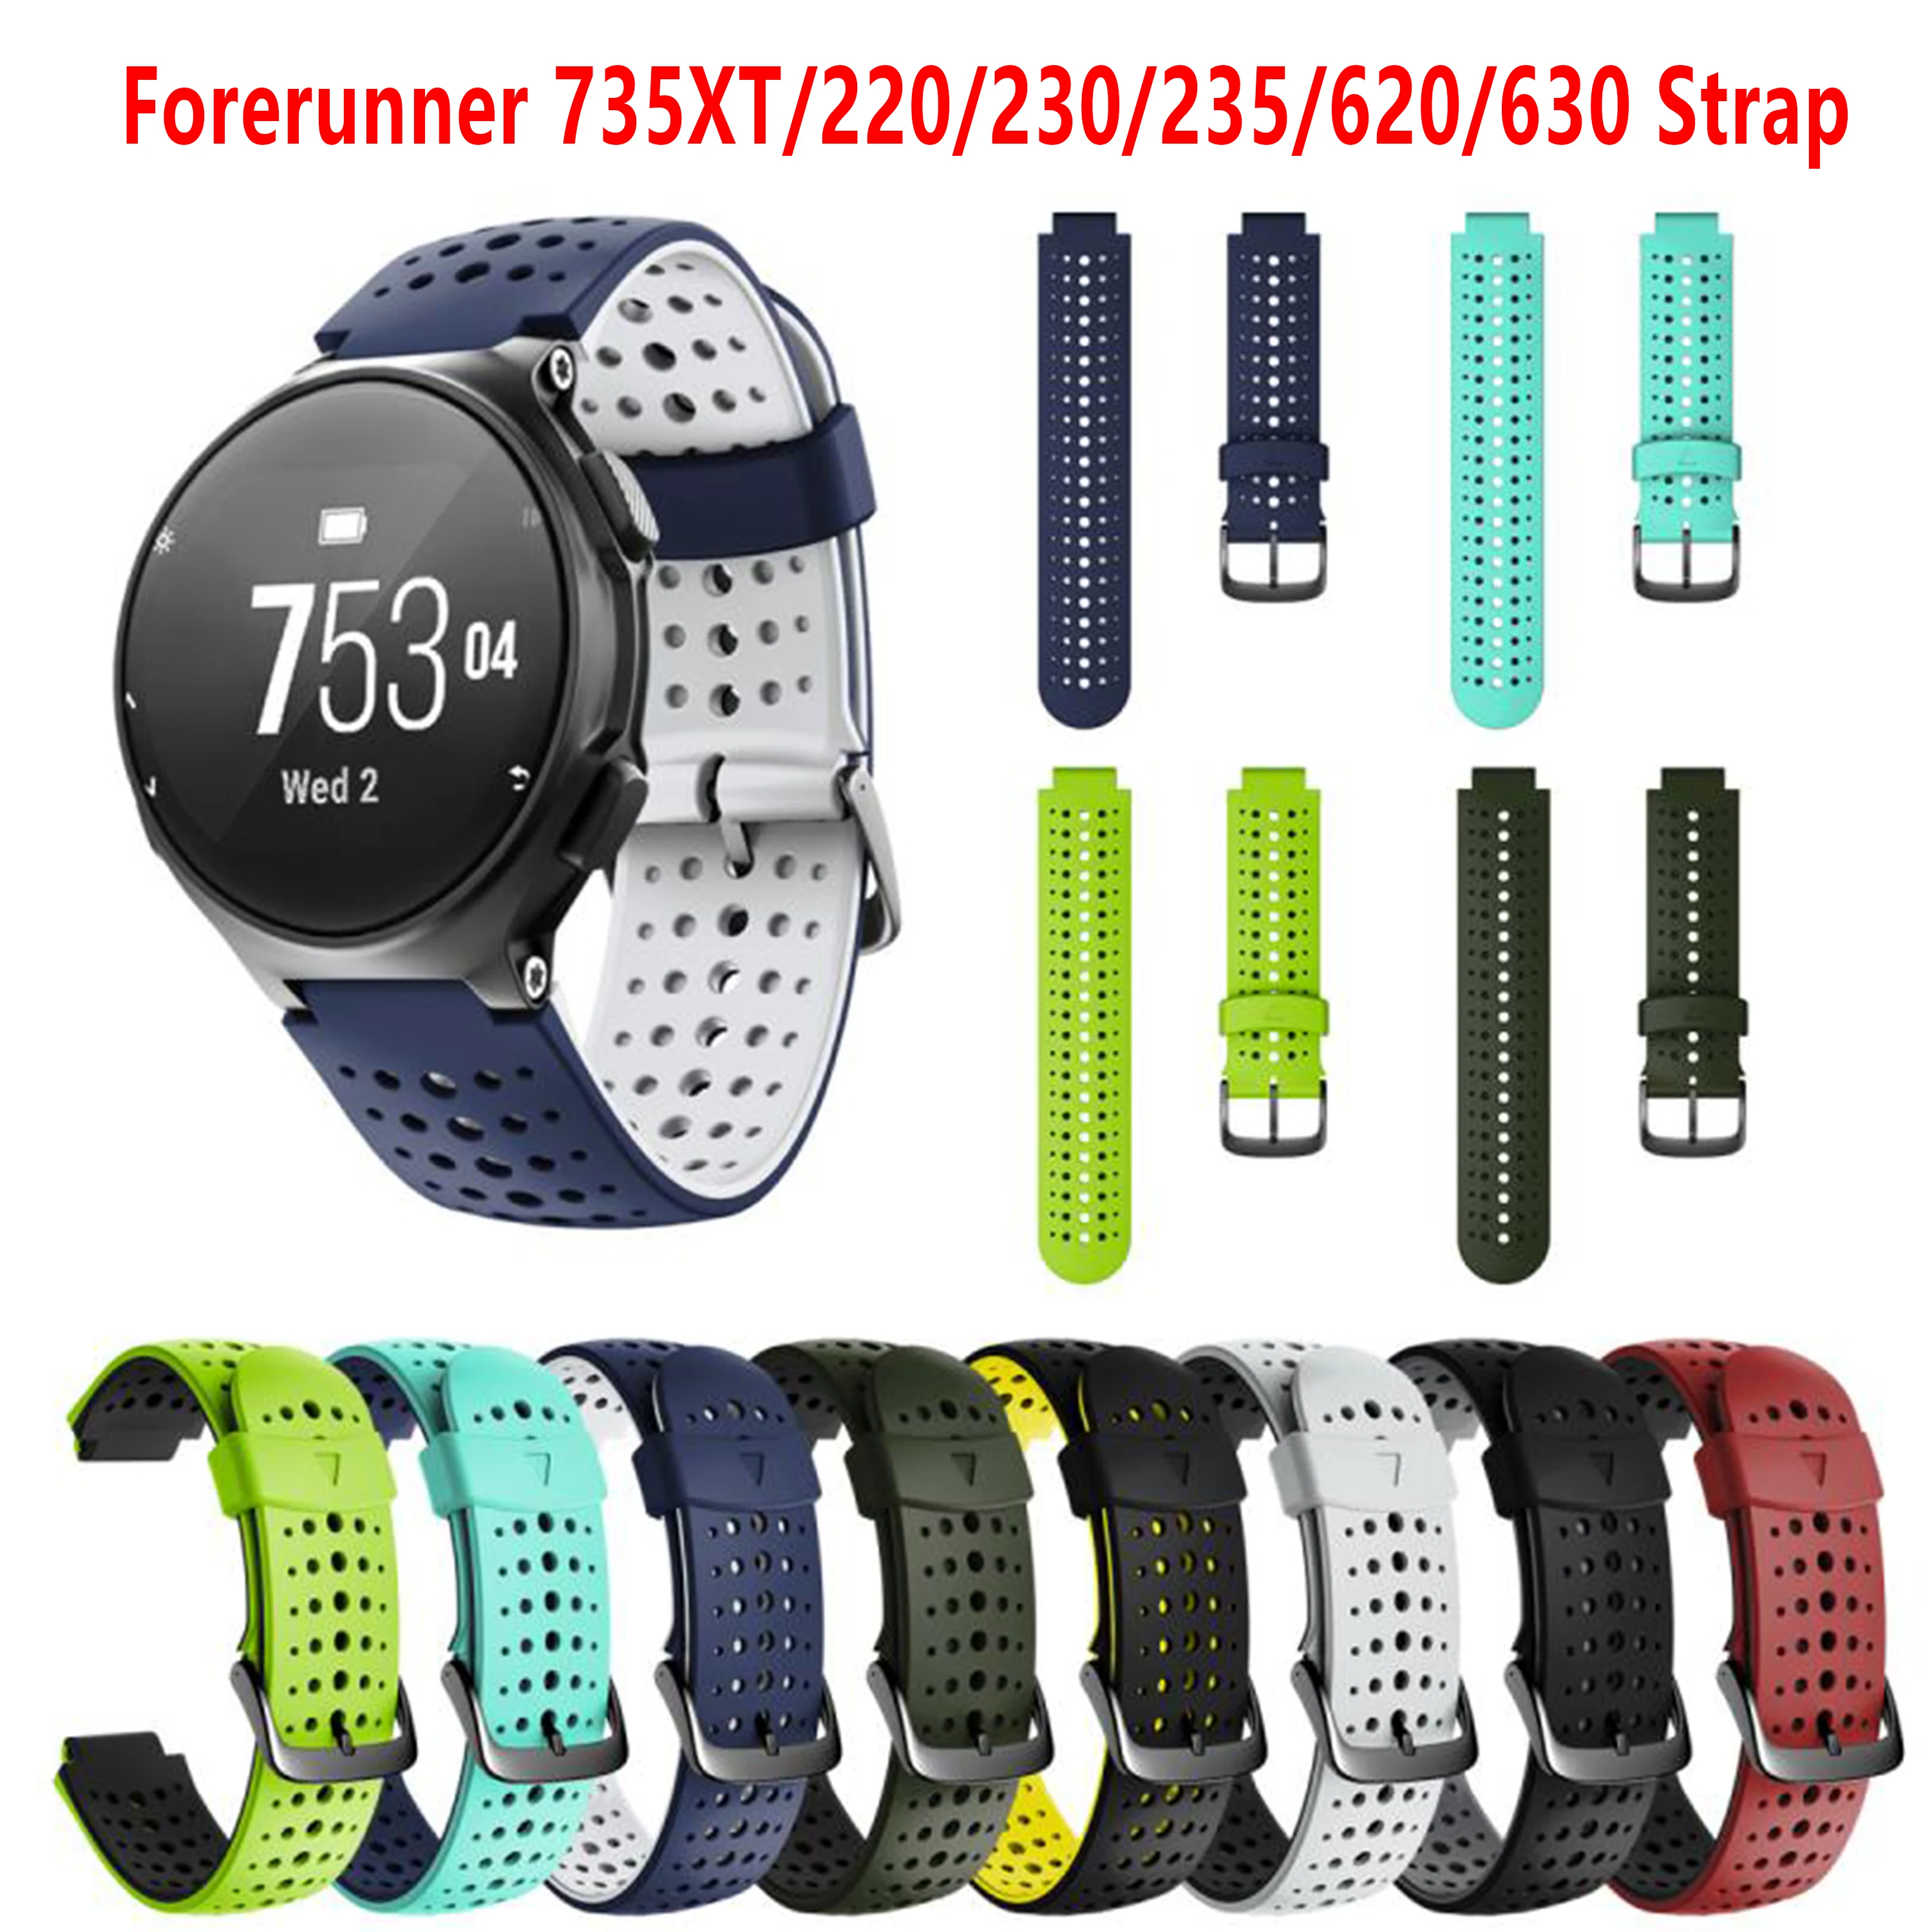 

Strap For Garmin Forerunner 220/230/235/620/630 Wristband Replacement Sport silicone bracelet Watch band For Forerunner 735XT